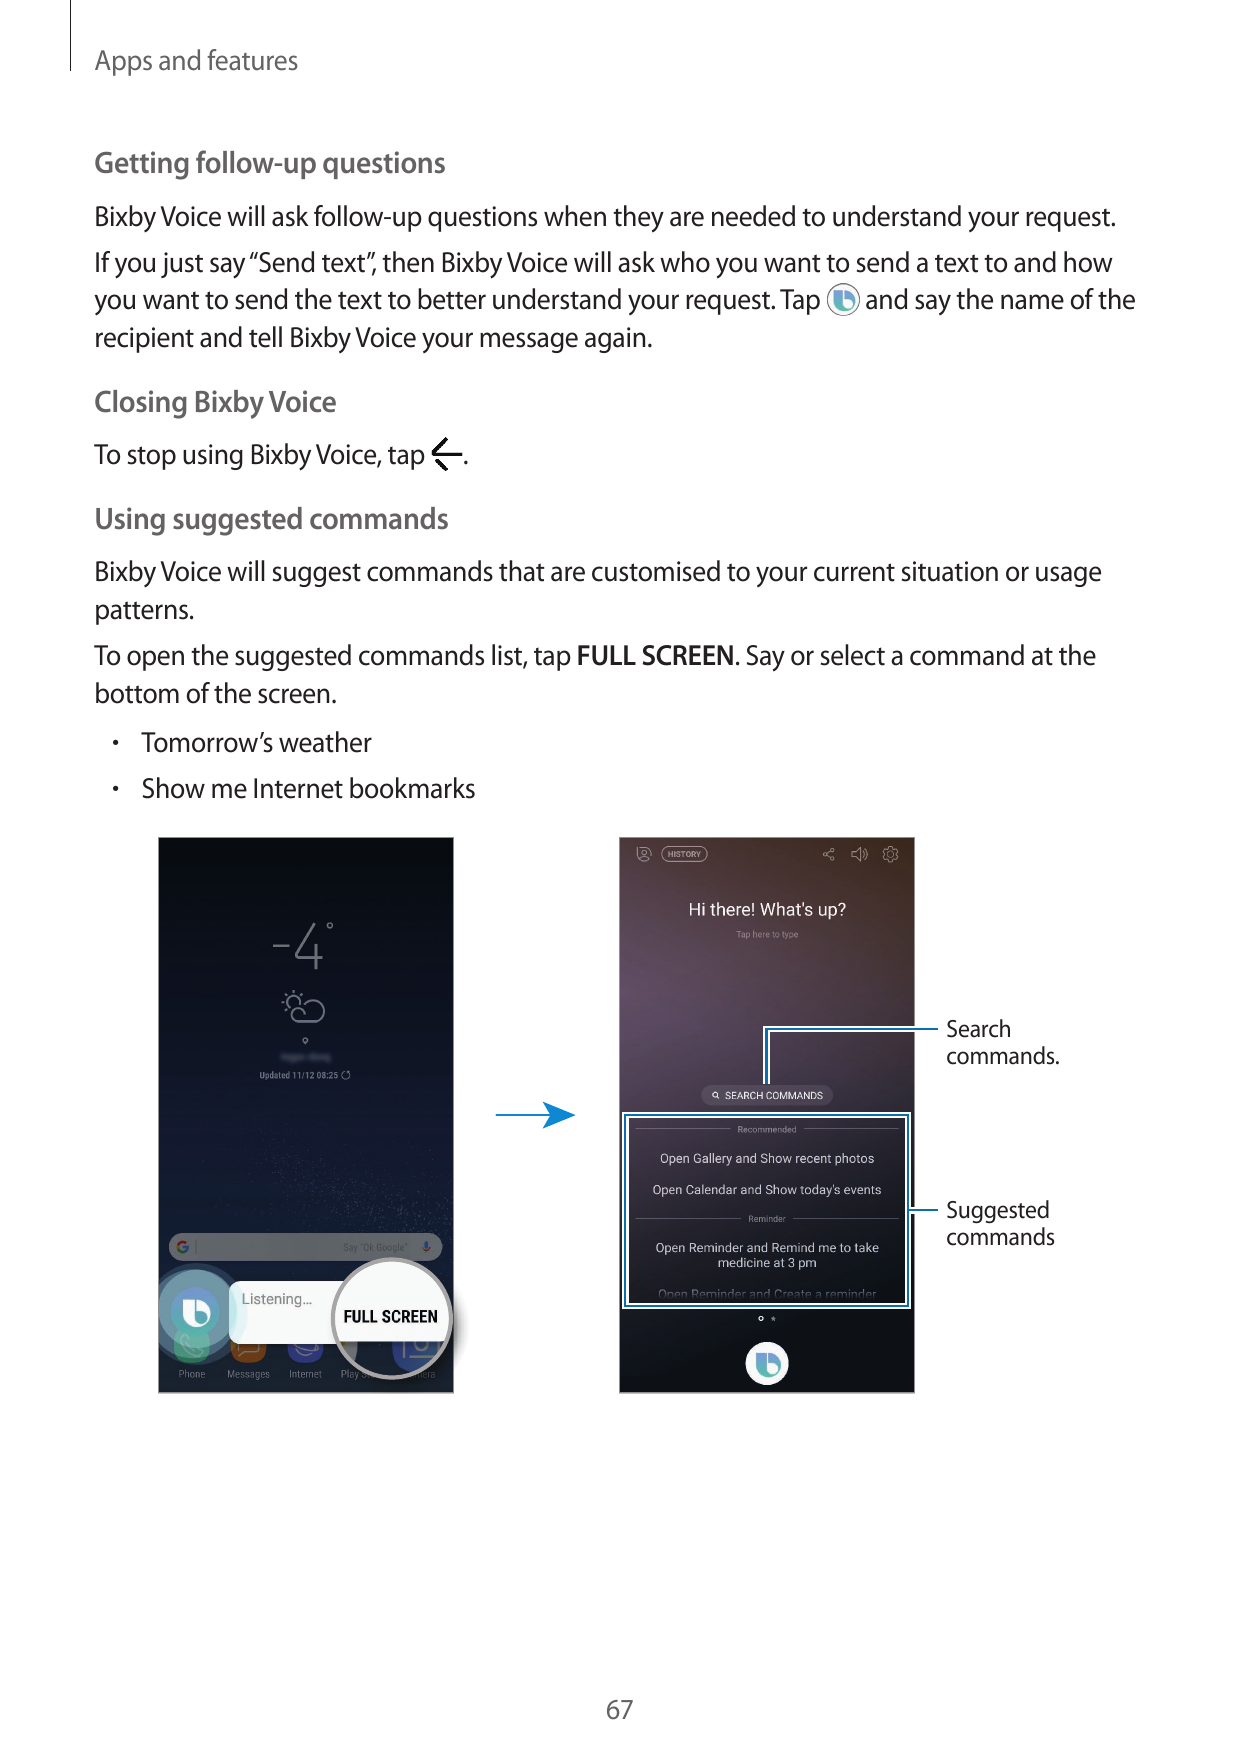 Apps and featuresGetting follow-up questionsBixby Voice will ask follow-up questions when they are needed to understand your req